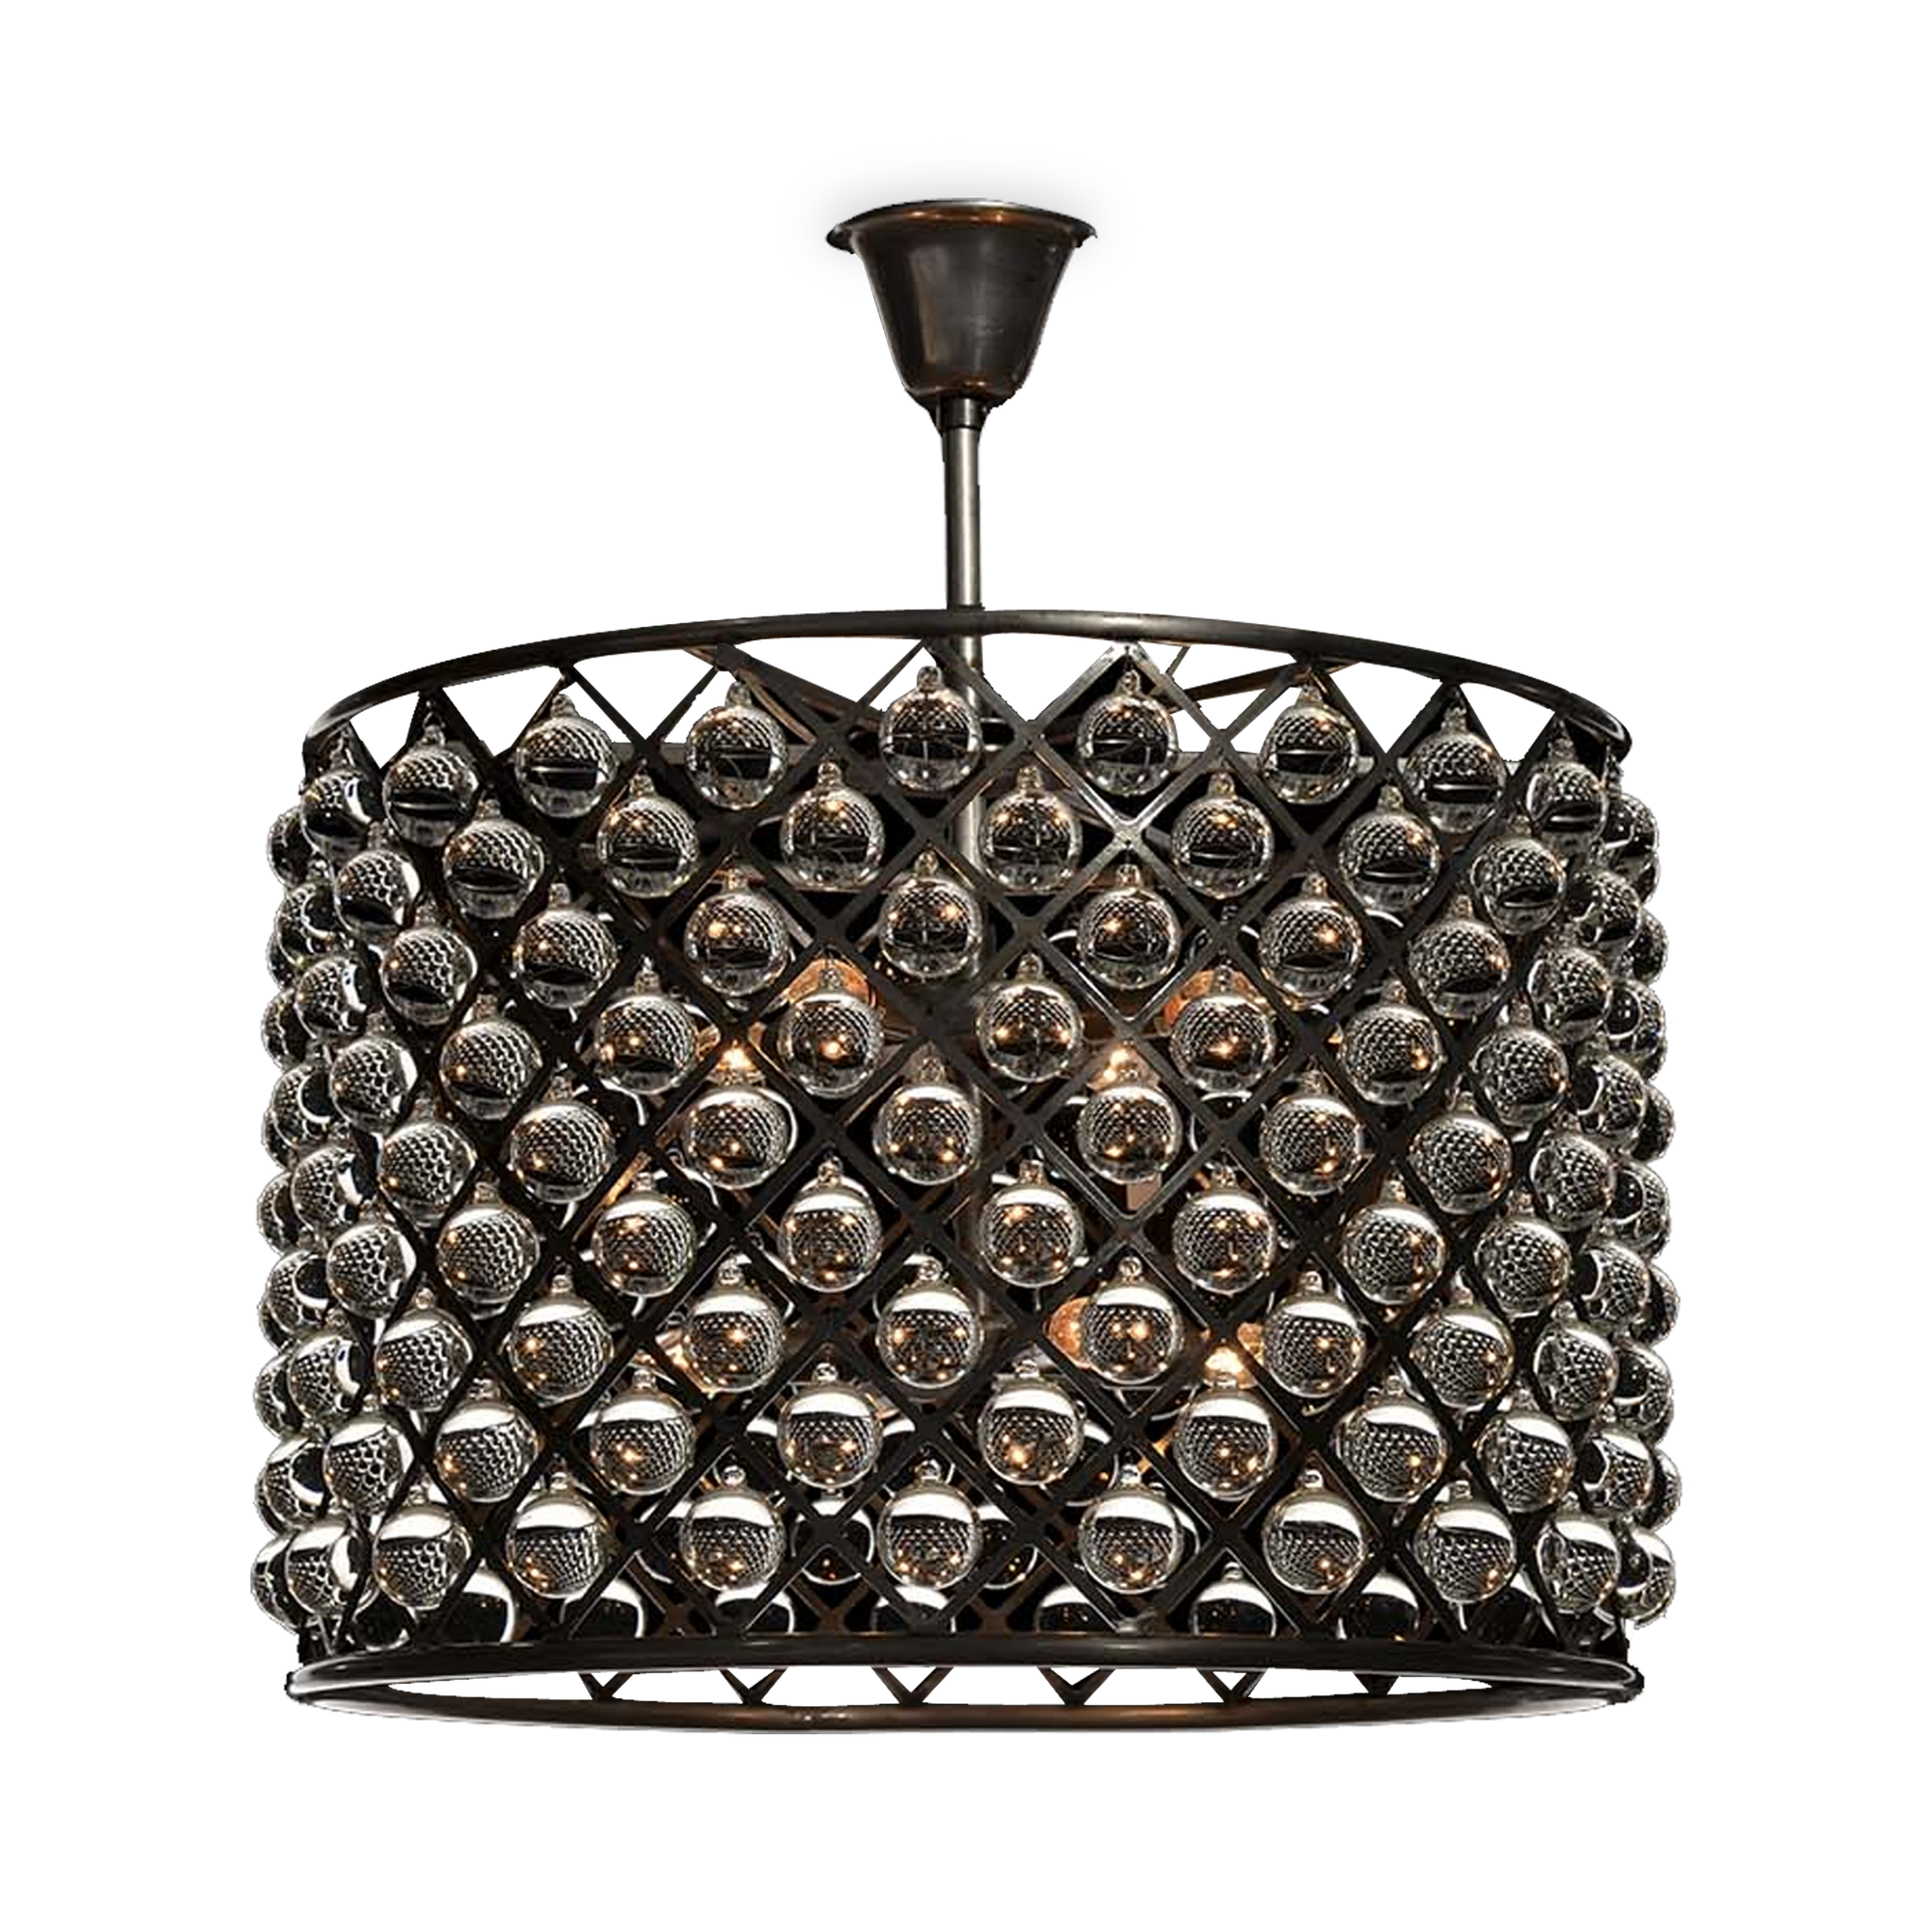 The Zig Zag Chandelier features delicate spheres of handpolished glass suspended from an intricate iron skeleton.